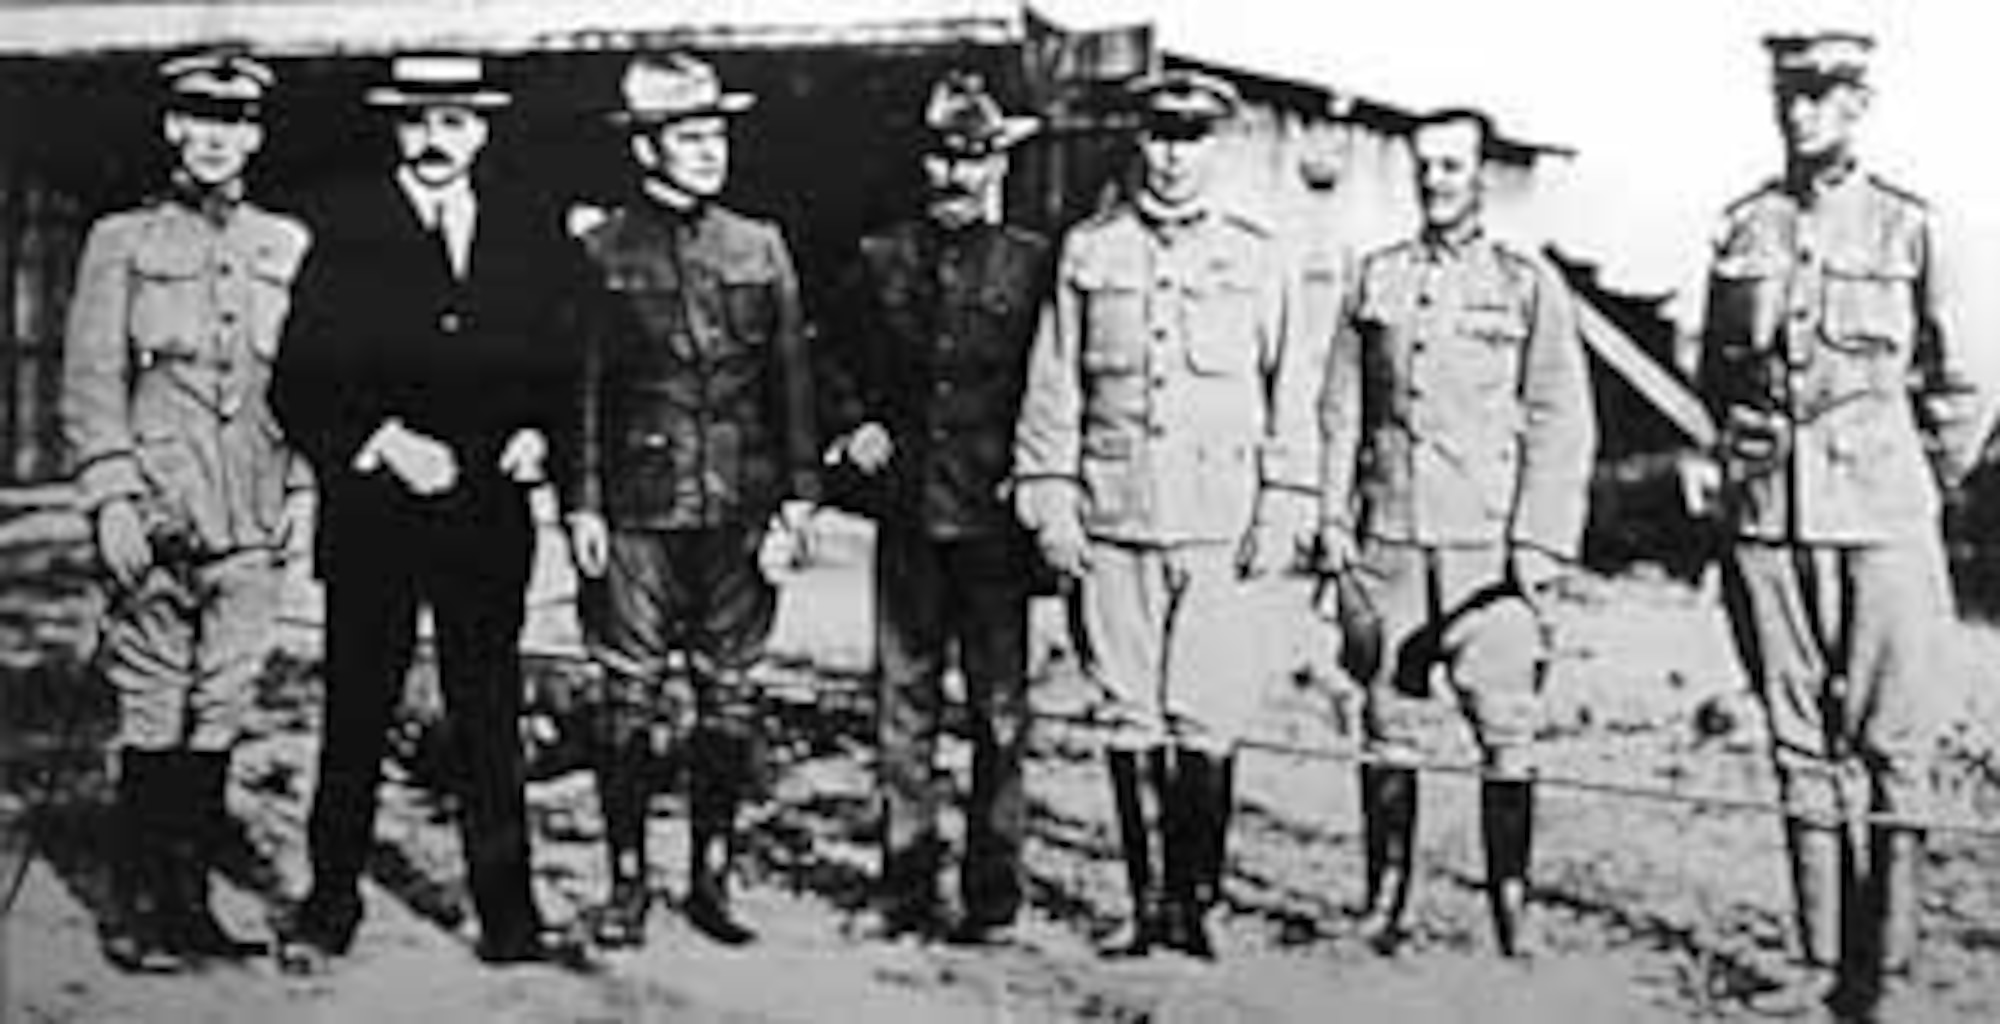 The Aeronautical Board, which conducted the official tests of the 1909 Flyer. From left to right are Lt. Frank Lahm, Lt. George Sweet, Maj. Charles Saltzman, Maj. George Squier, Capt. Charles Chandler, Lt. Benjamin Foulois and Lt. Frederick Humphreys. (U.S. Air Force photo)